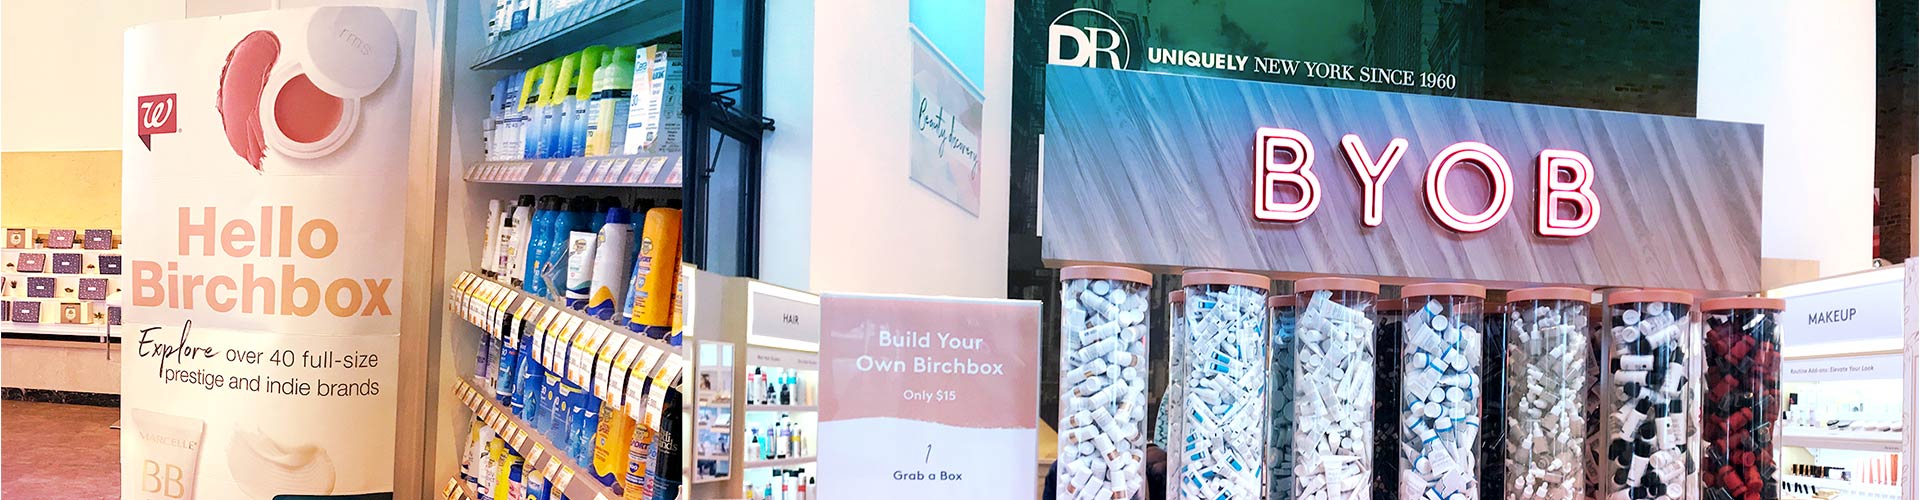 Blog banner featuring BYOB station and Birchbox promotion